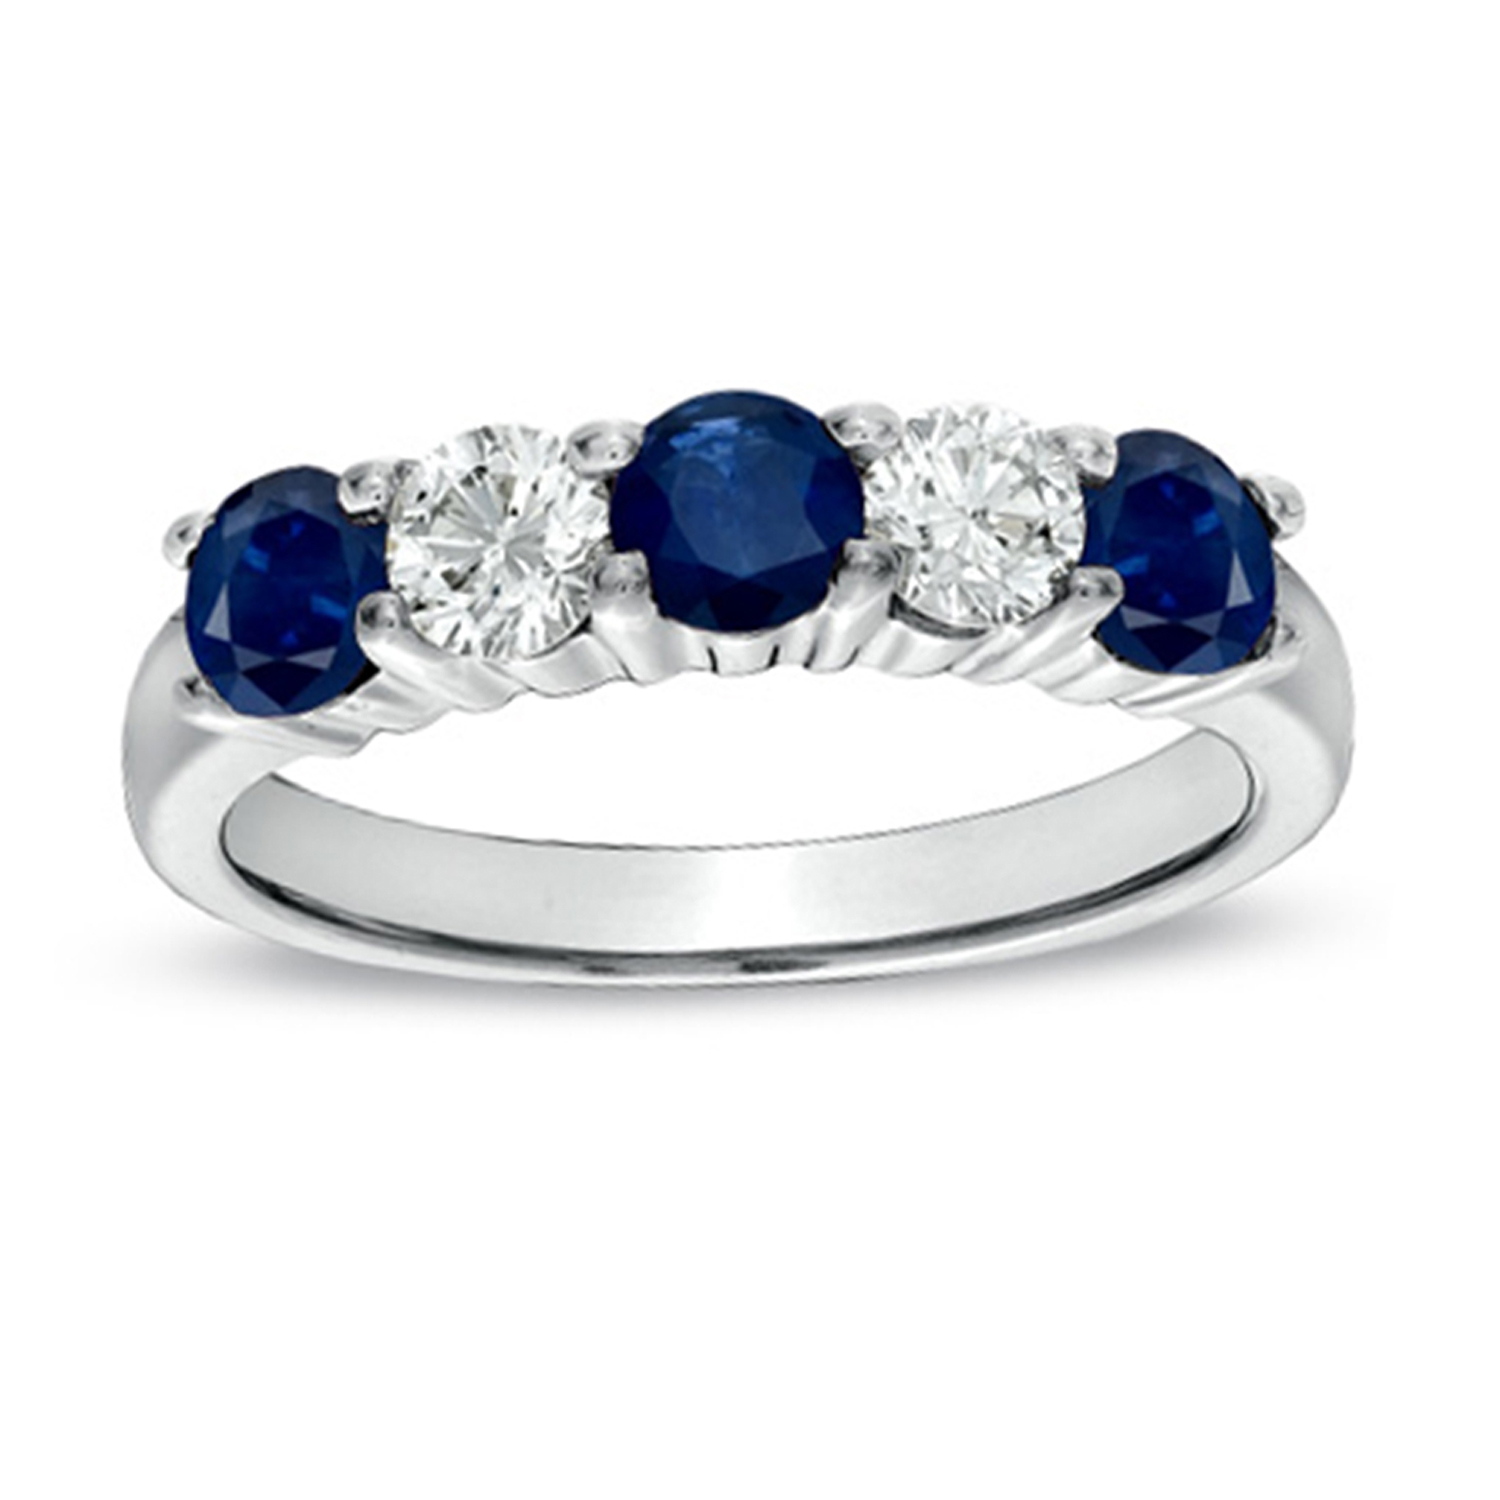 1.26cttw Sapphire and Diamond Ring set in 14k Gold